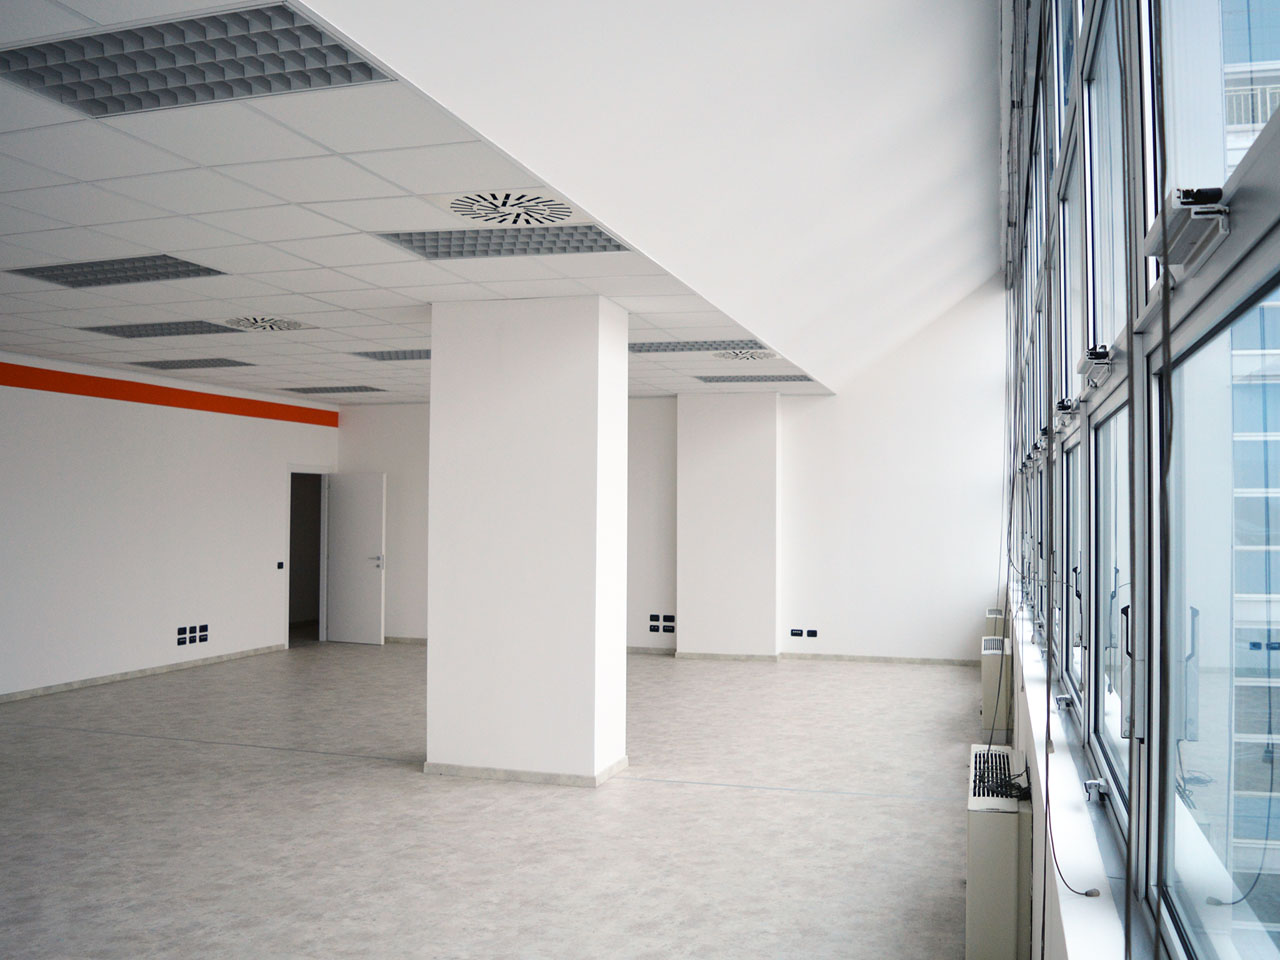 Open space west side - office for rent in Milan - 750 mq (8073 sqft)